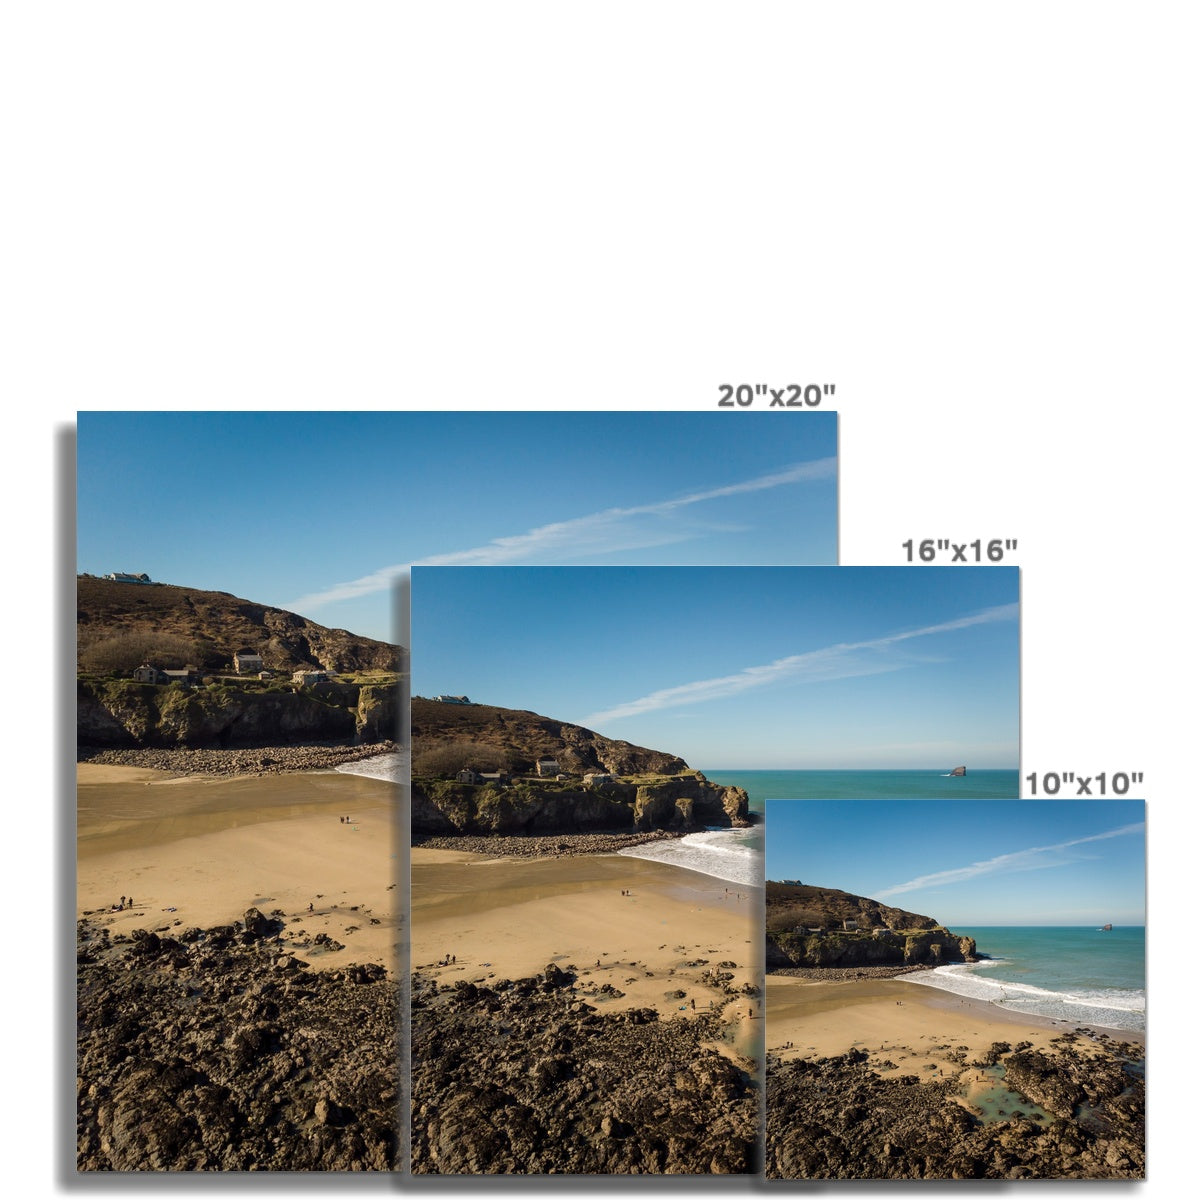 trevaunance cove picture sizes